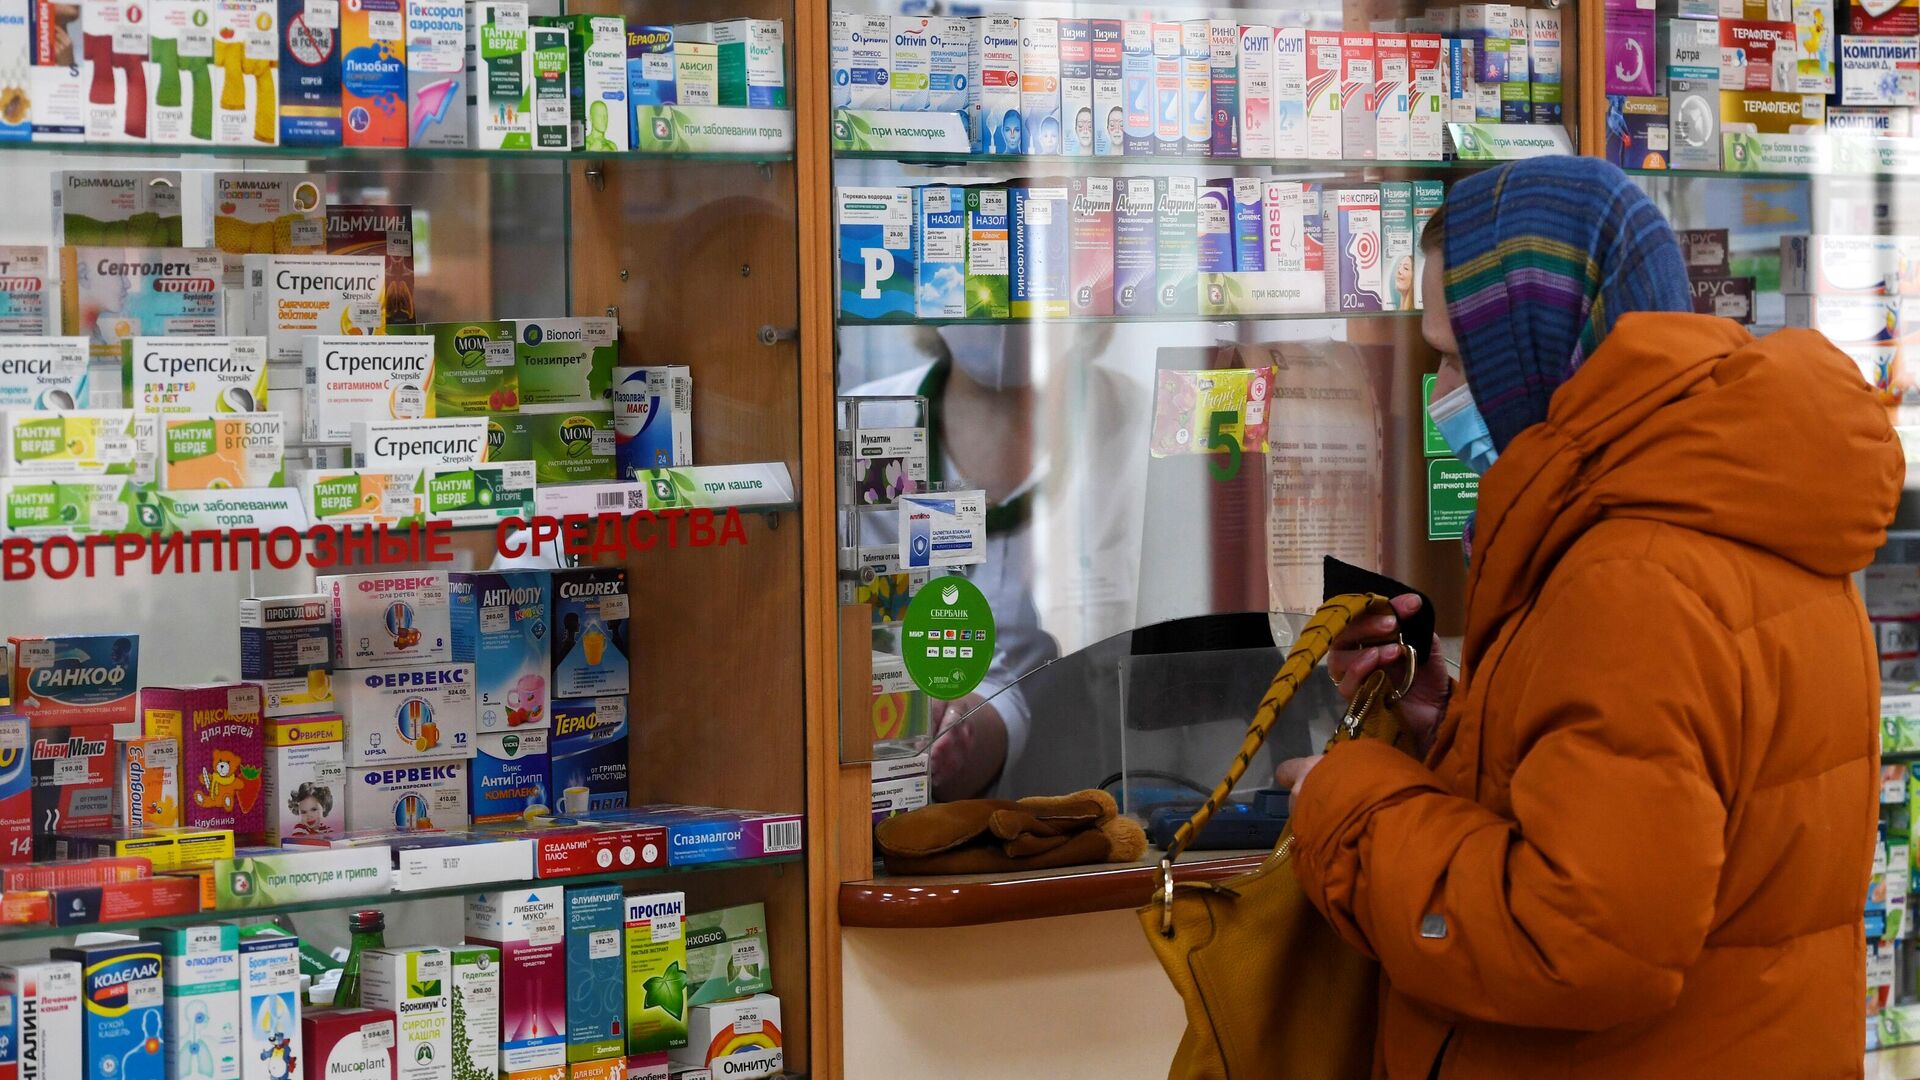 A survey noted that more than half of Russians have experienced an increase in drug prices